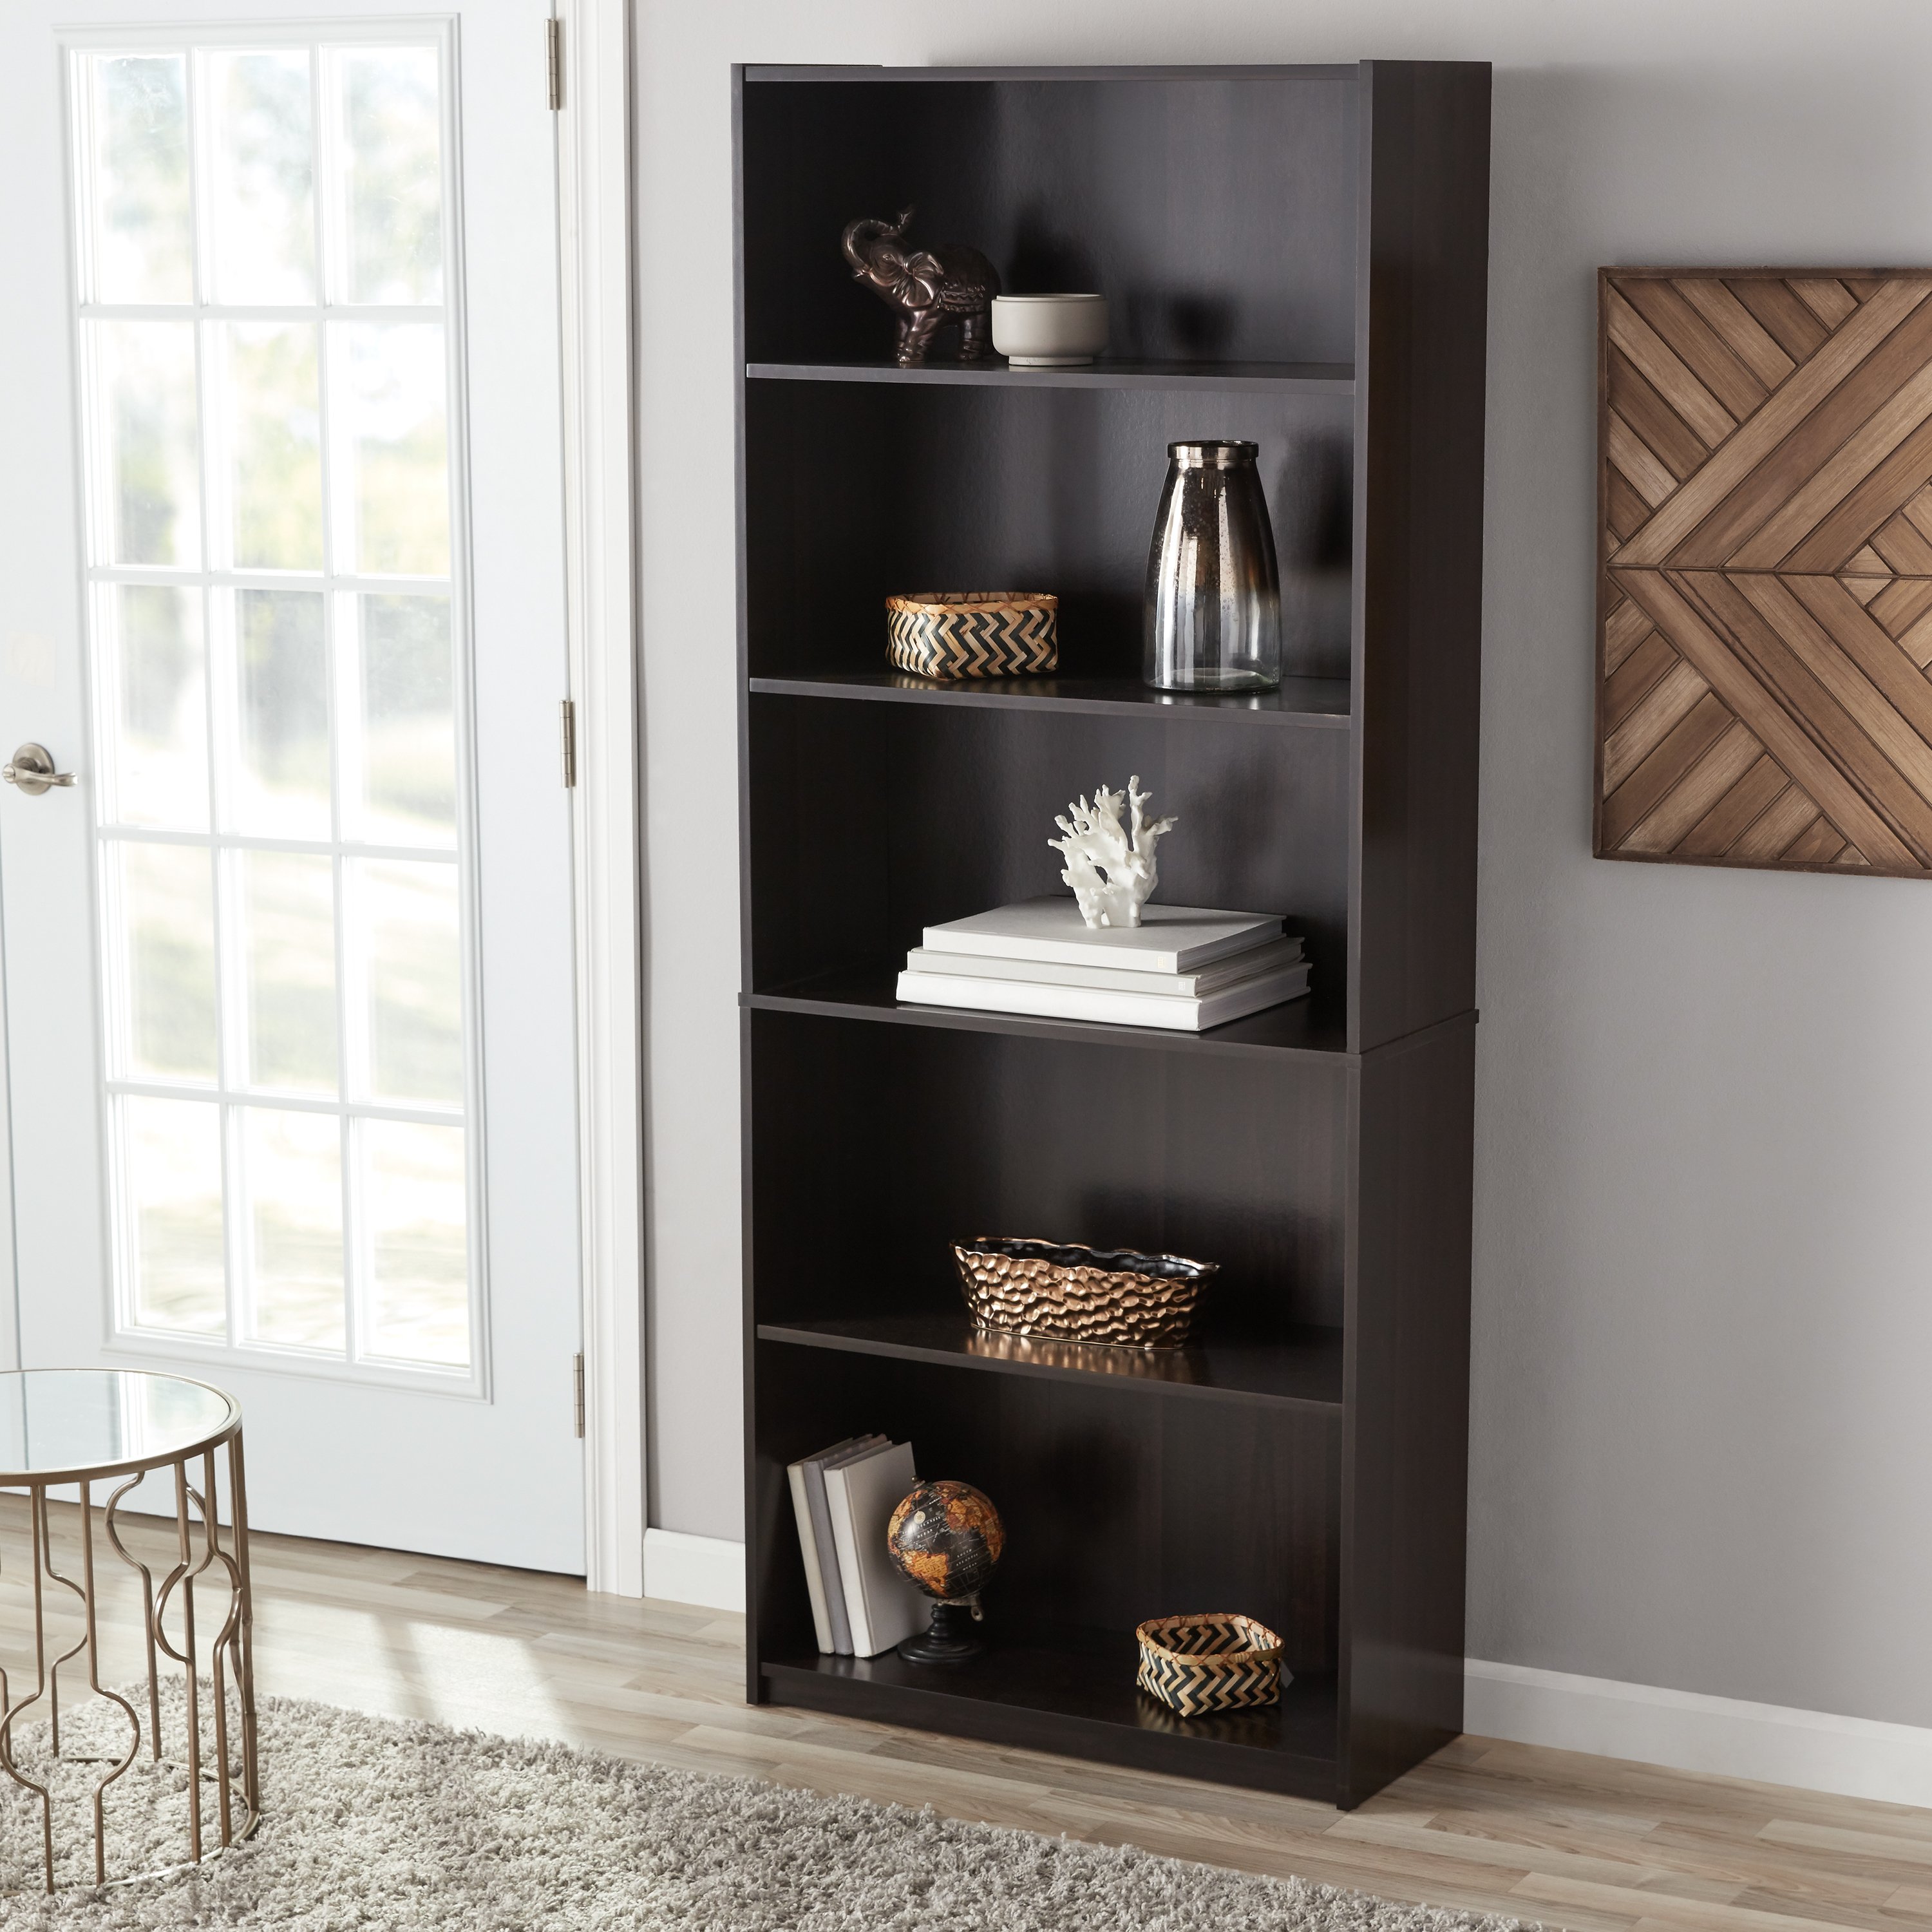 mainstays shelf standard bookcase multiple finishes houzz floating shelves living room applying peel and stick tile rona shelving ikea computer table wall mounted coat rack with